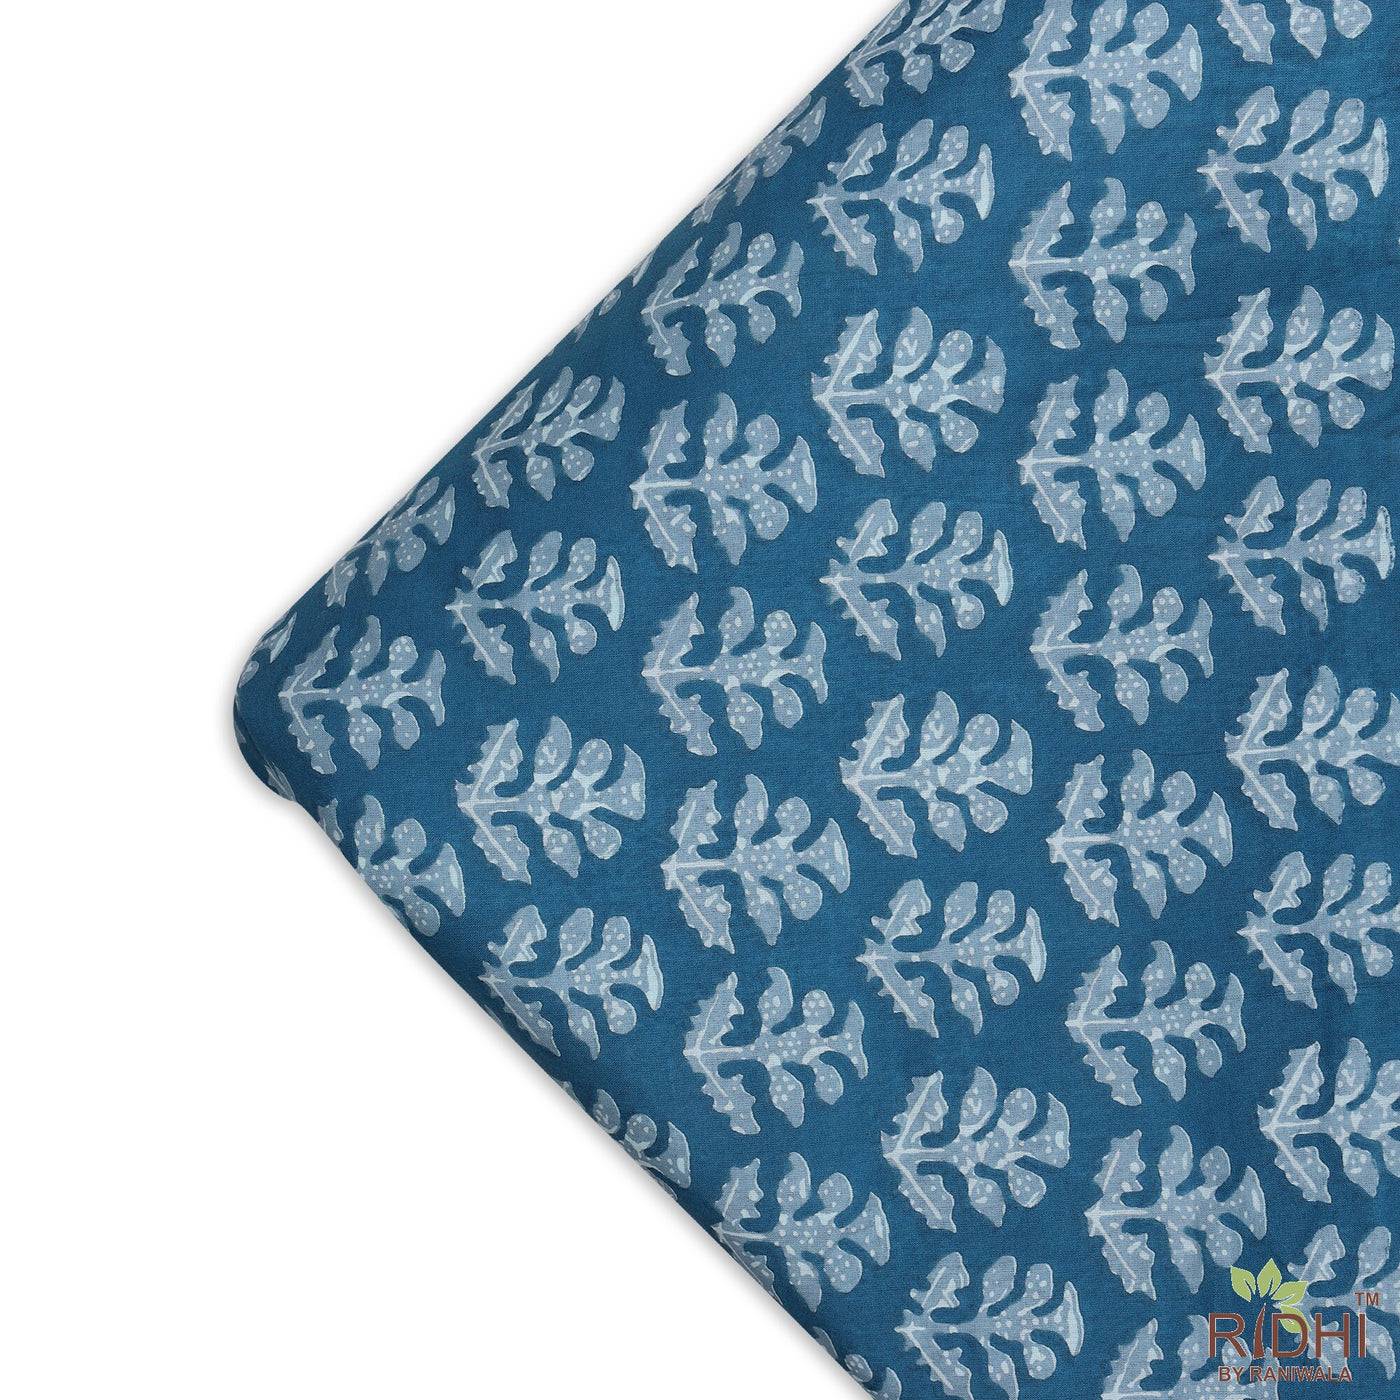 Teal Blue Indian Floral Printed 100% Pure Cotton Cloth, Fabric by the yard, Quilt Fabric, Fabric for curtain, Pillows, Cushions, Dresses